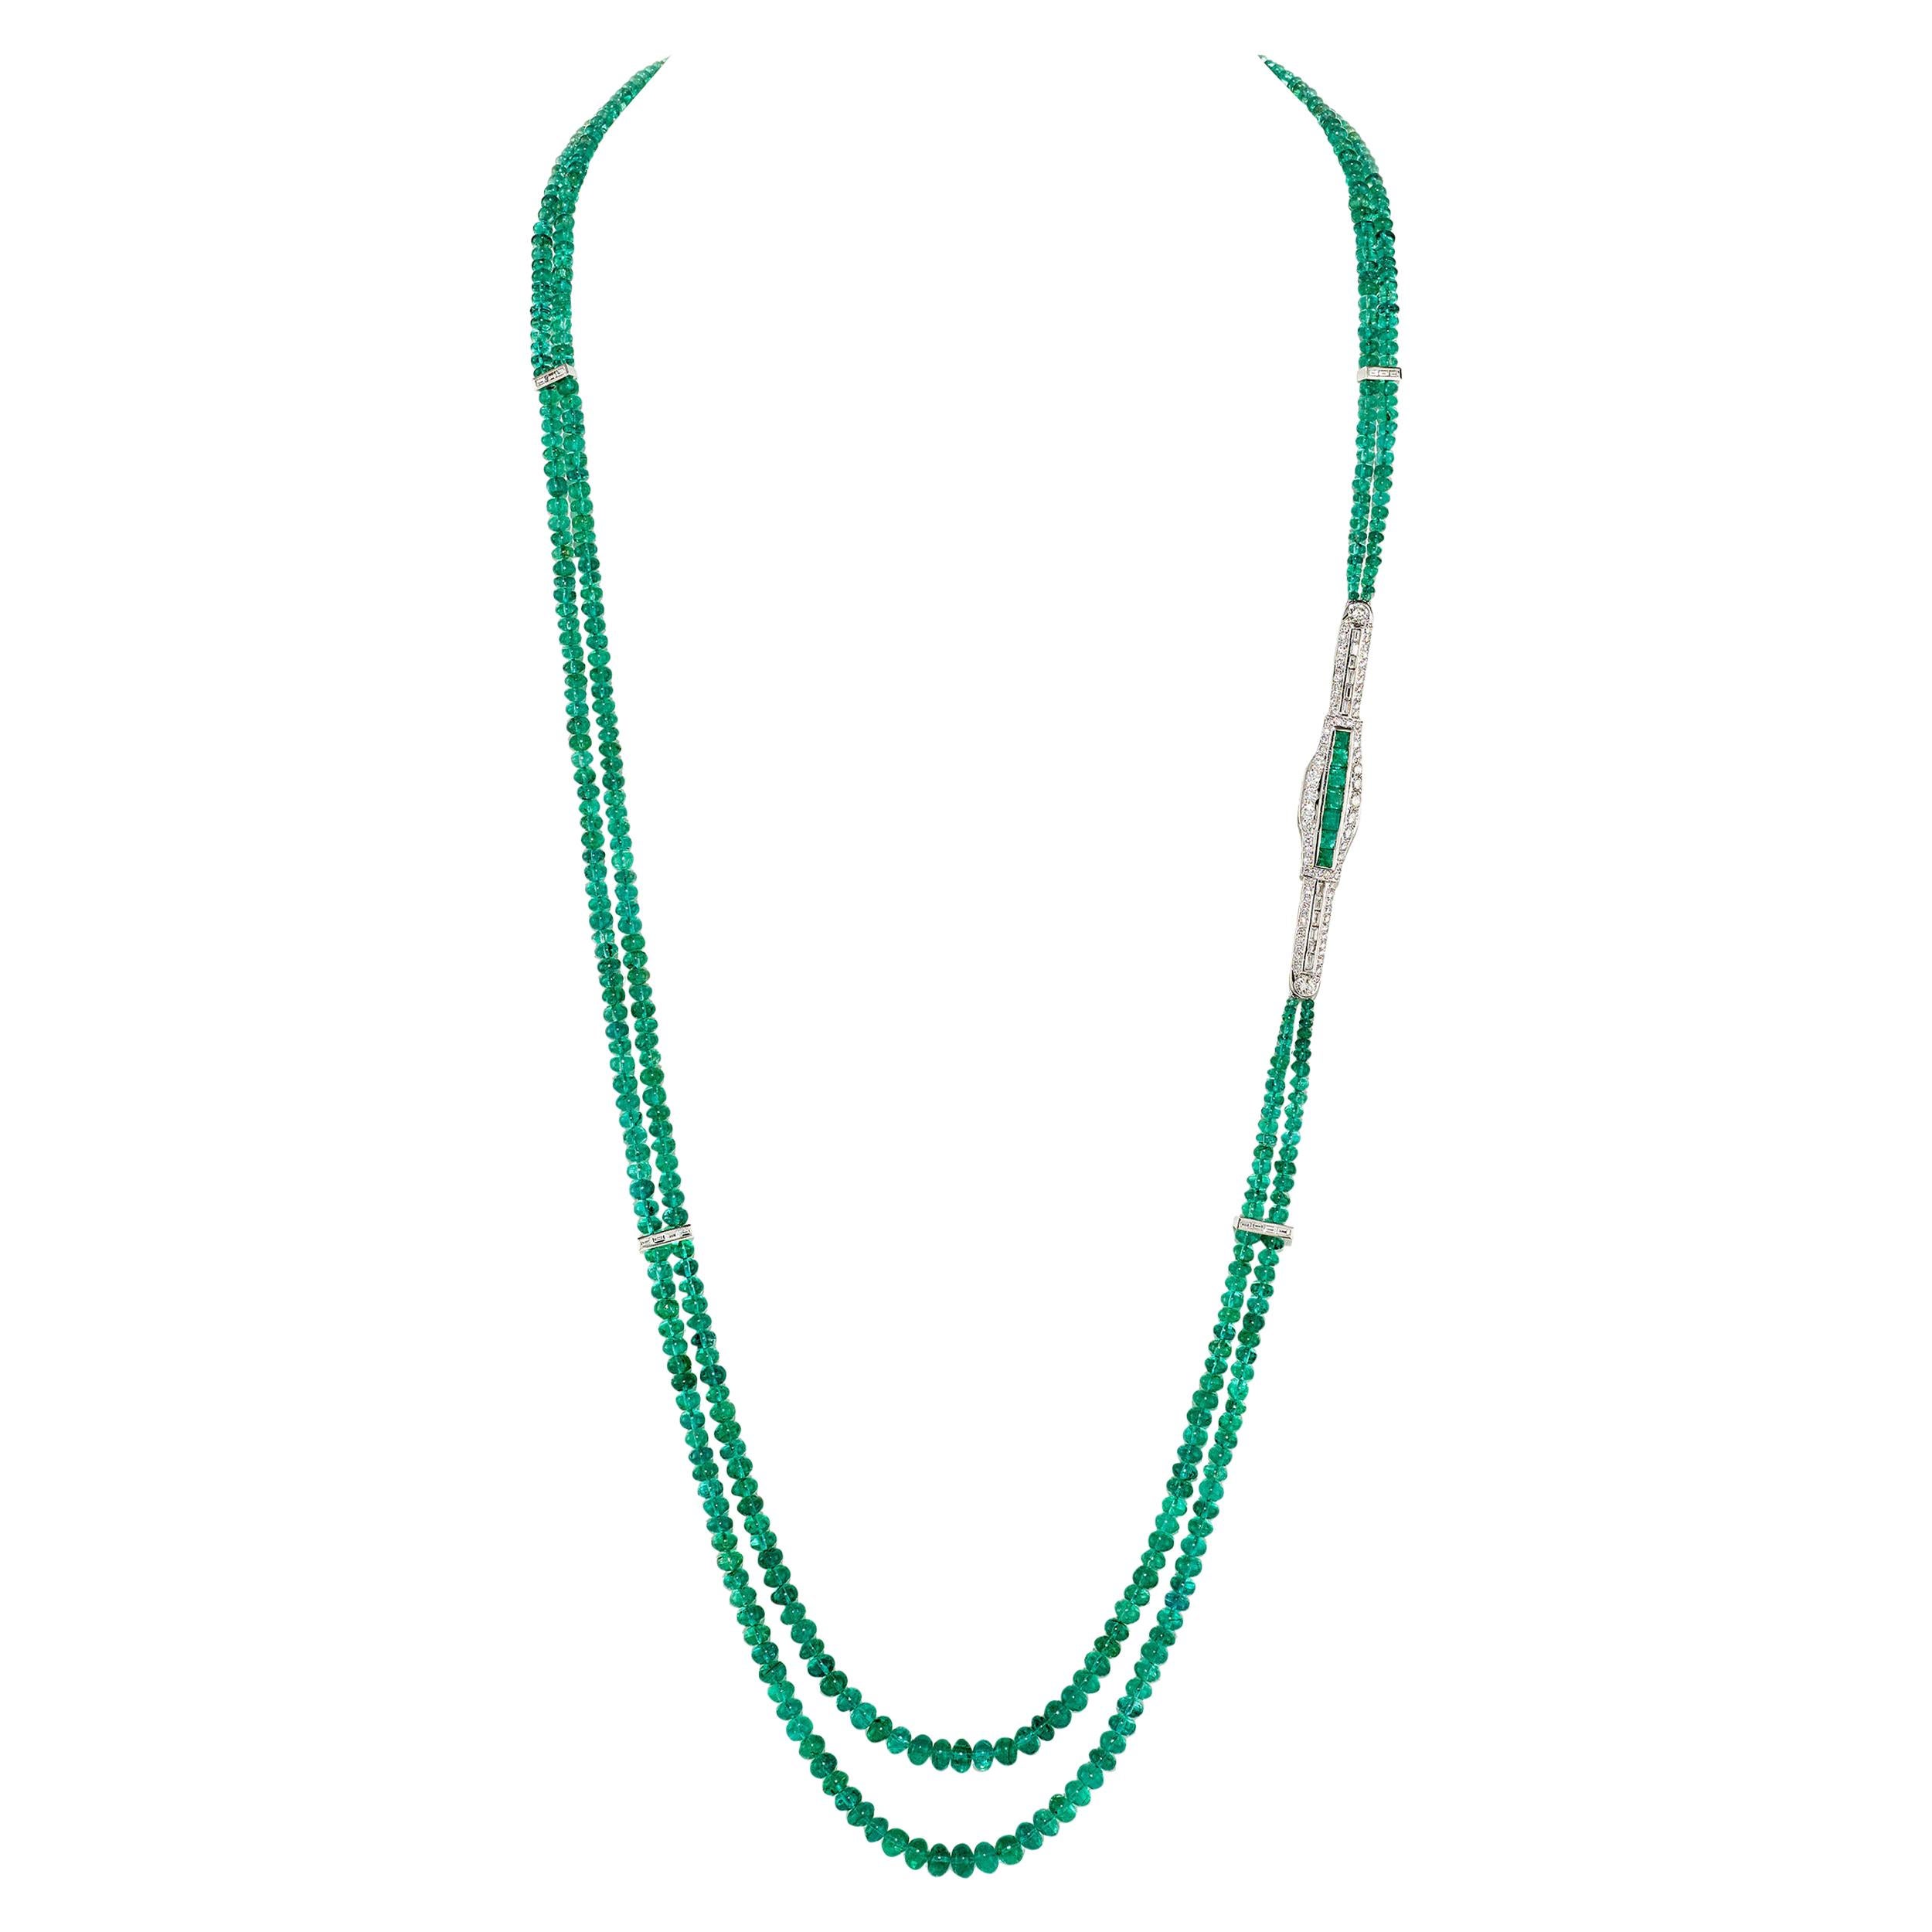 220.31 Carat Rondelle Emerald Necklace with Emeralds and Diamonds in Platinum